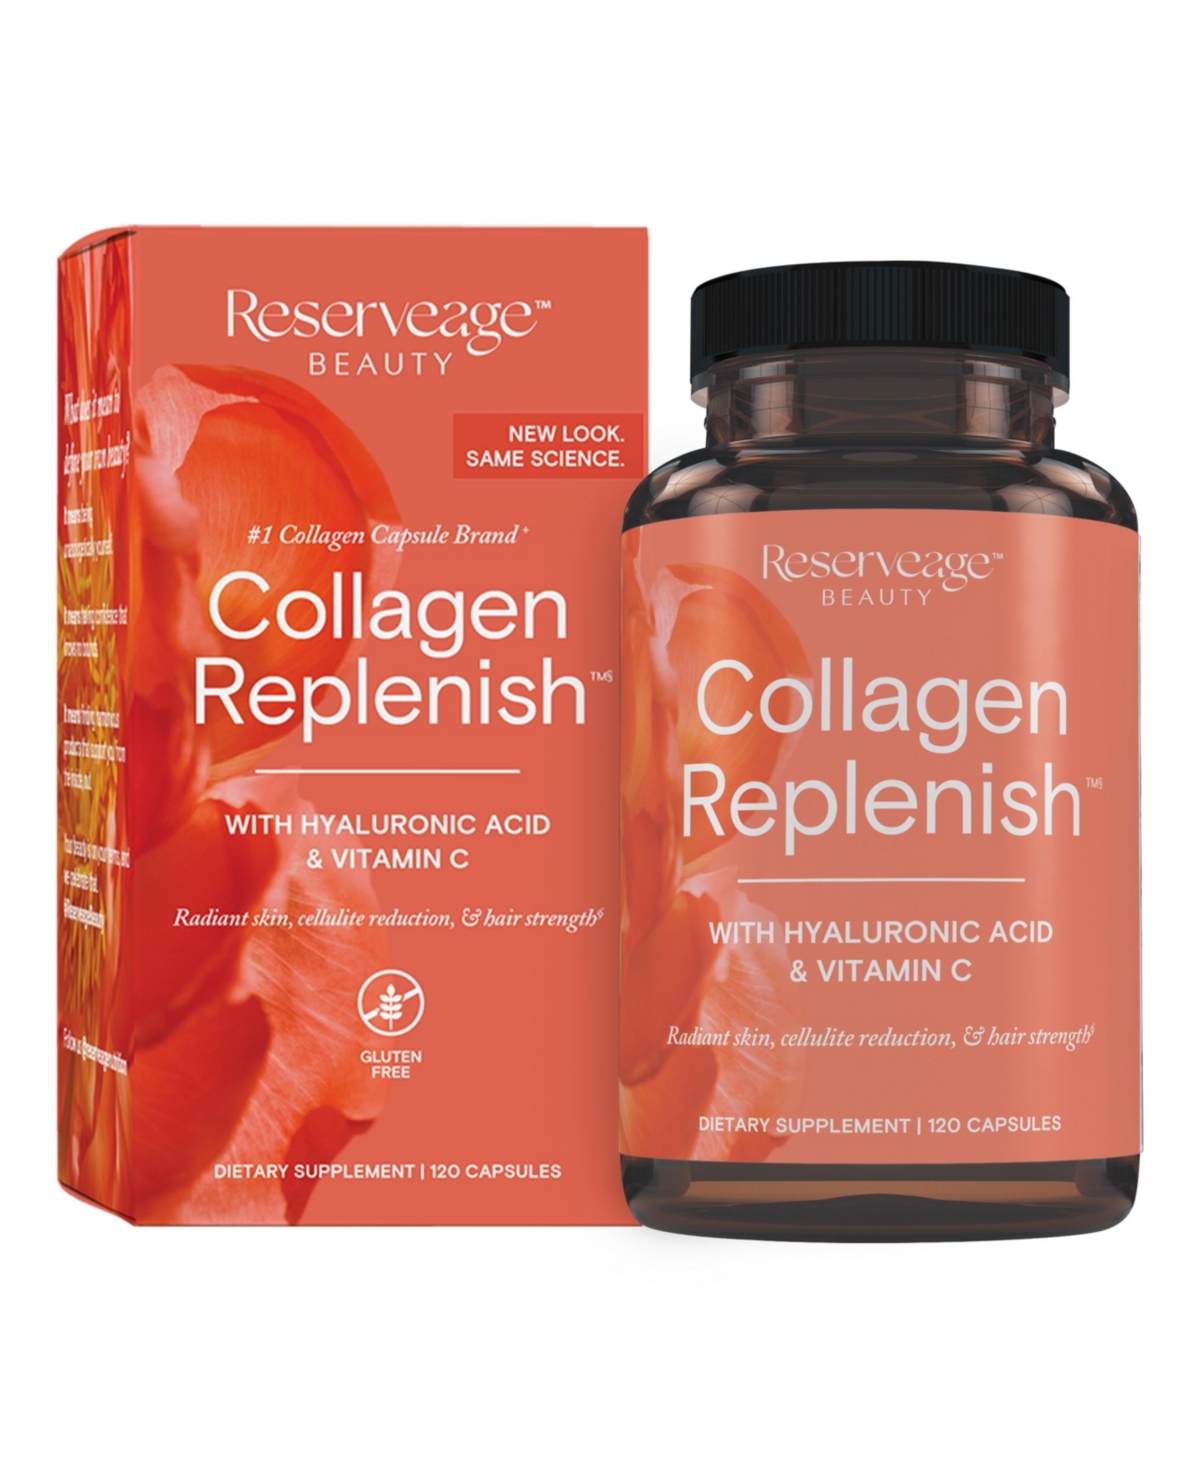 Collagen Replenish Capsules, Skin and Nail Supplement, Supports Collagen and Elastin Production, 120 capsules (30 servings)